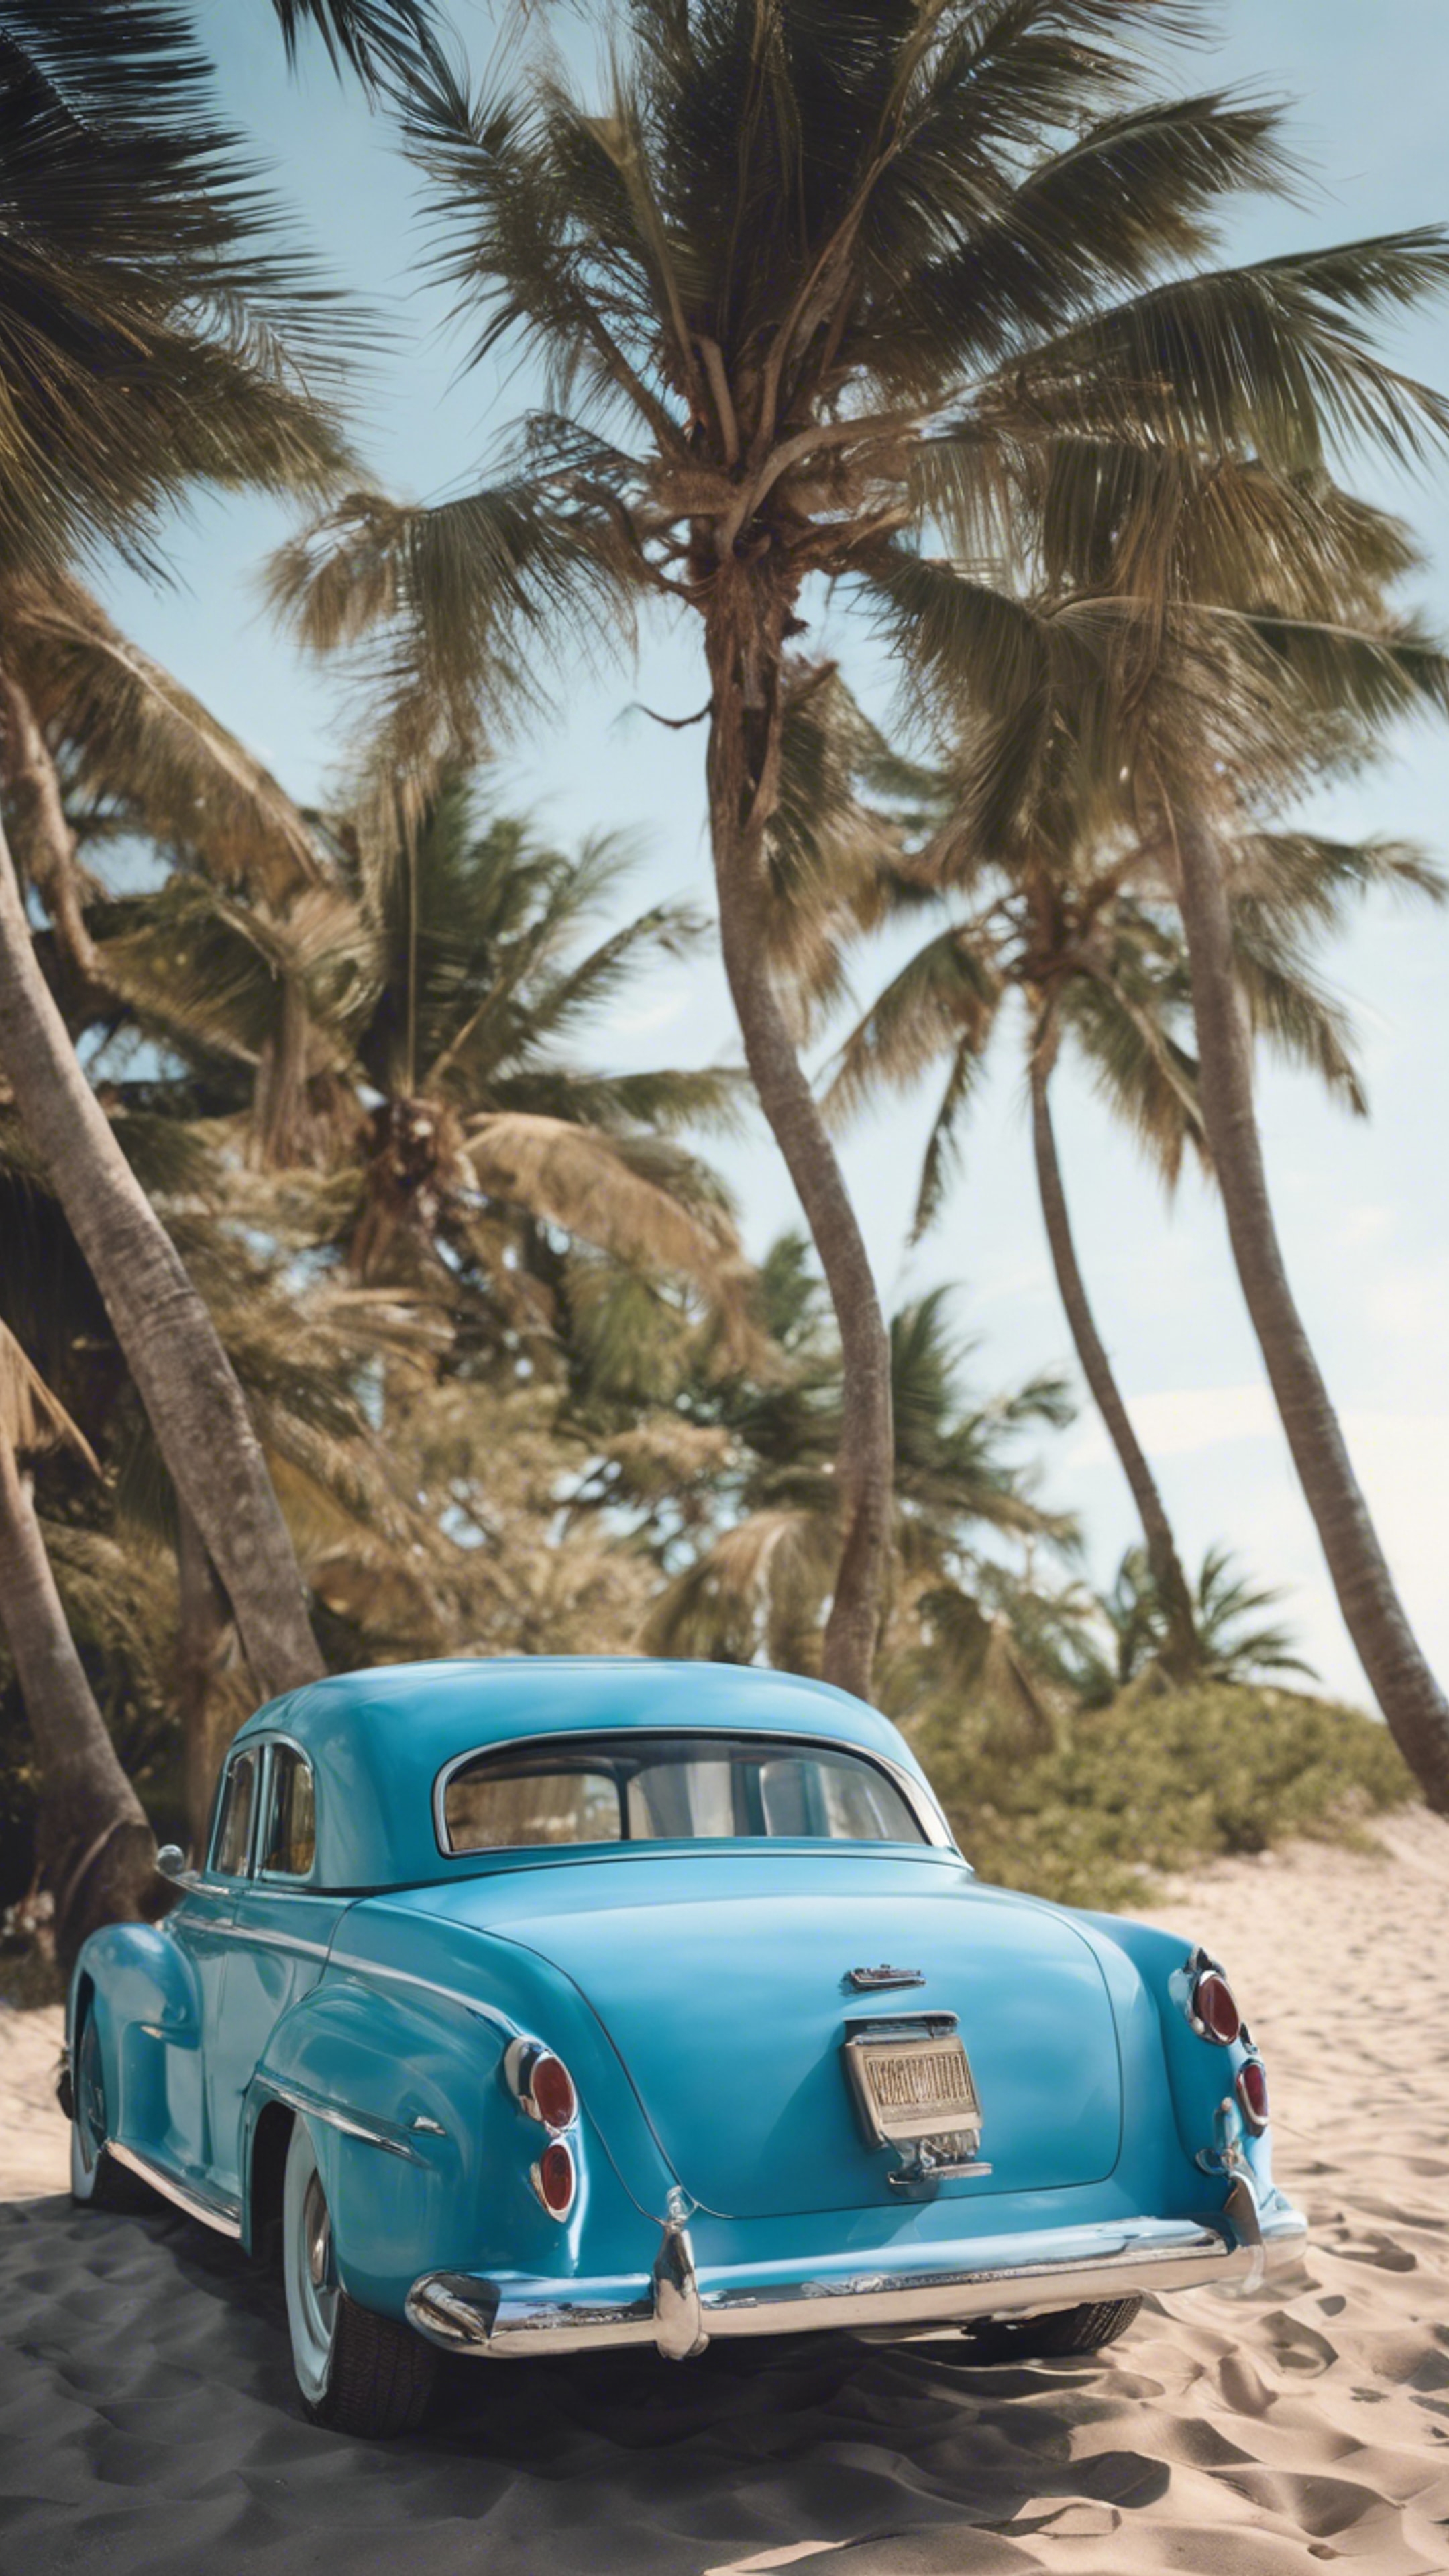 A vintage car painted in cool blue, parked by the beach Tapeta[7559f4037ca44818afd1]